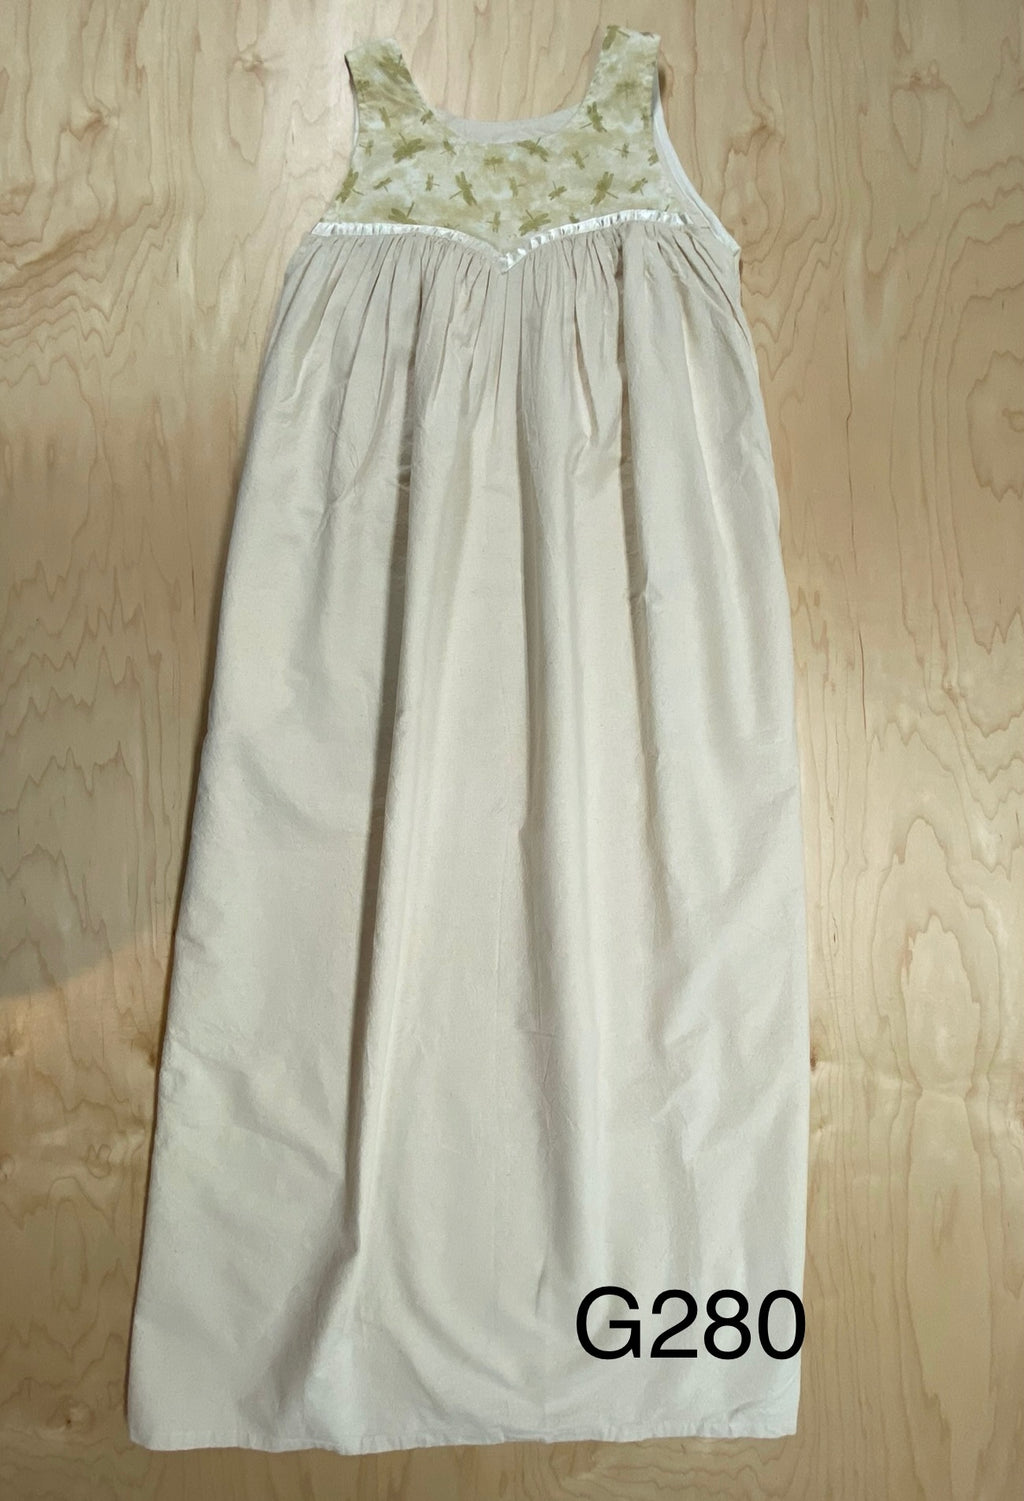 2nd G280  COTTON GOWN, SLEEVELESS, SIZE SMALL